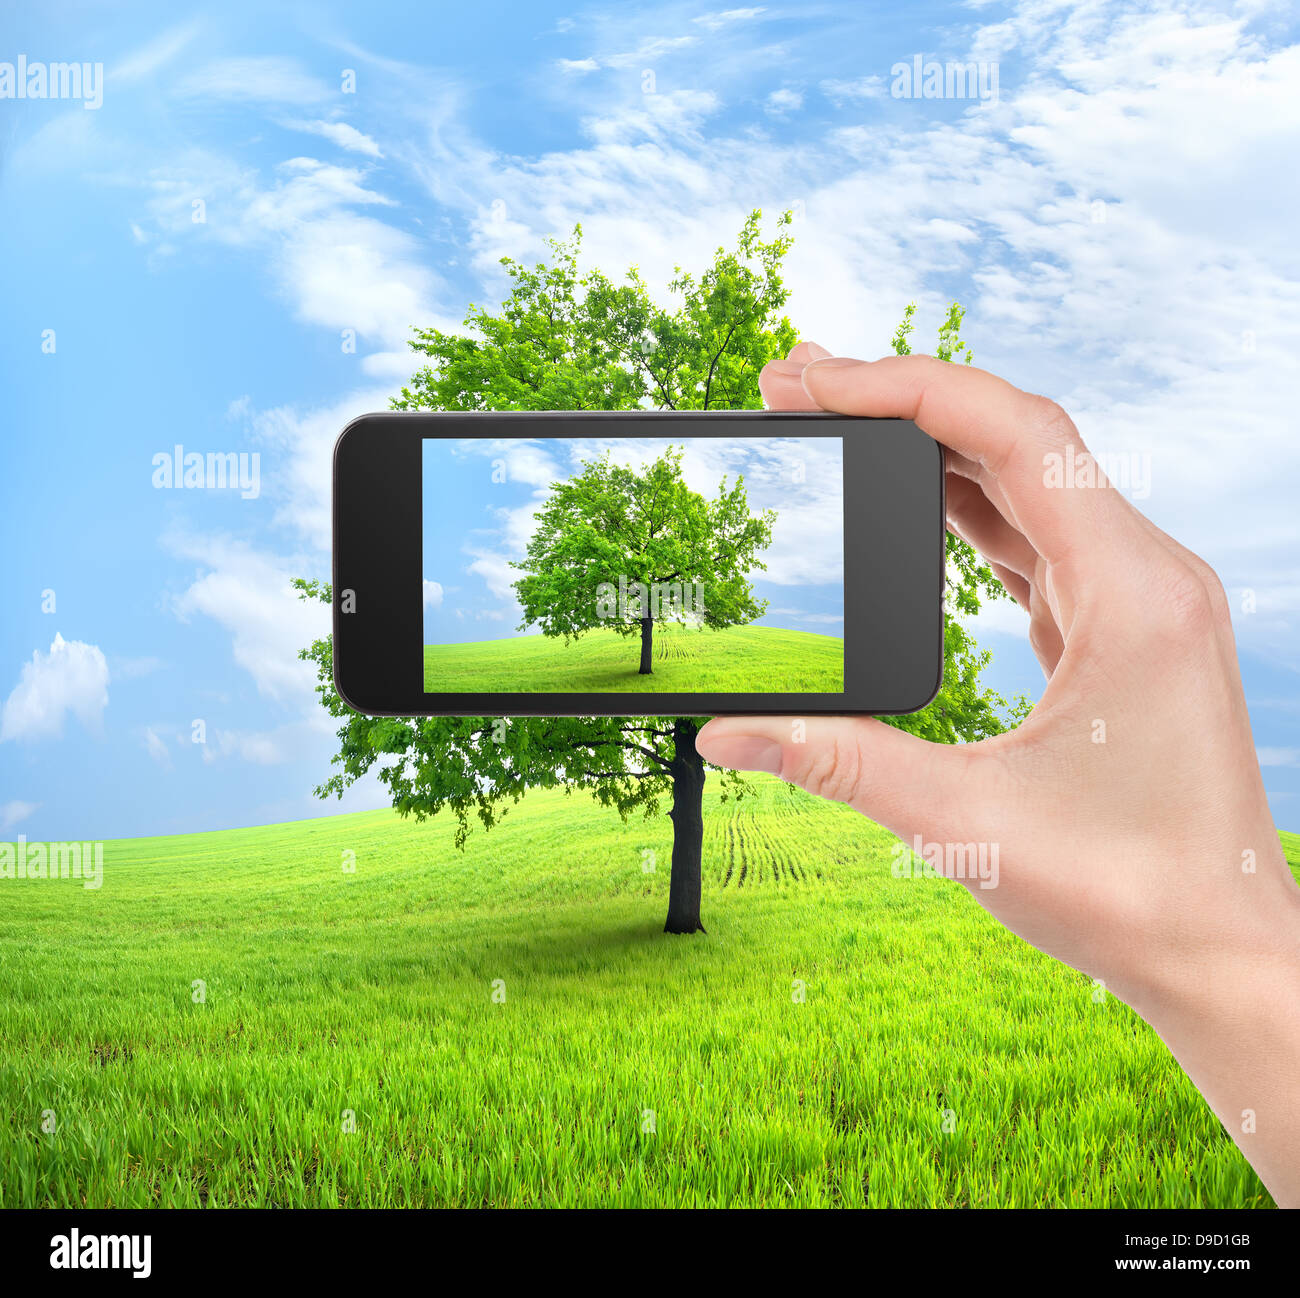 Mobile phone in hand and tree in field Stock Photo